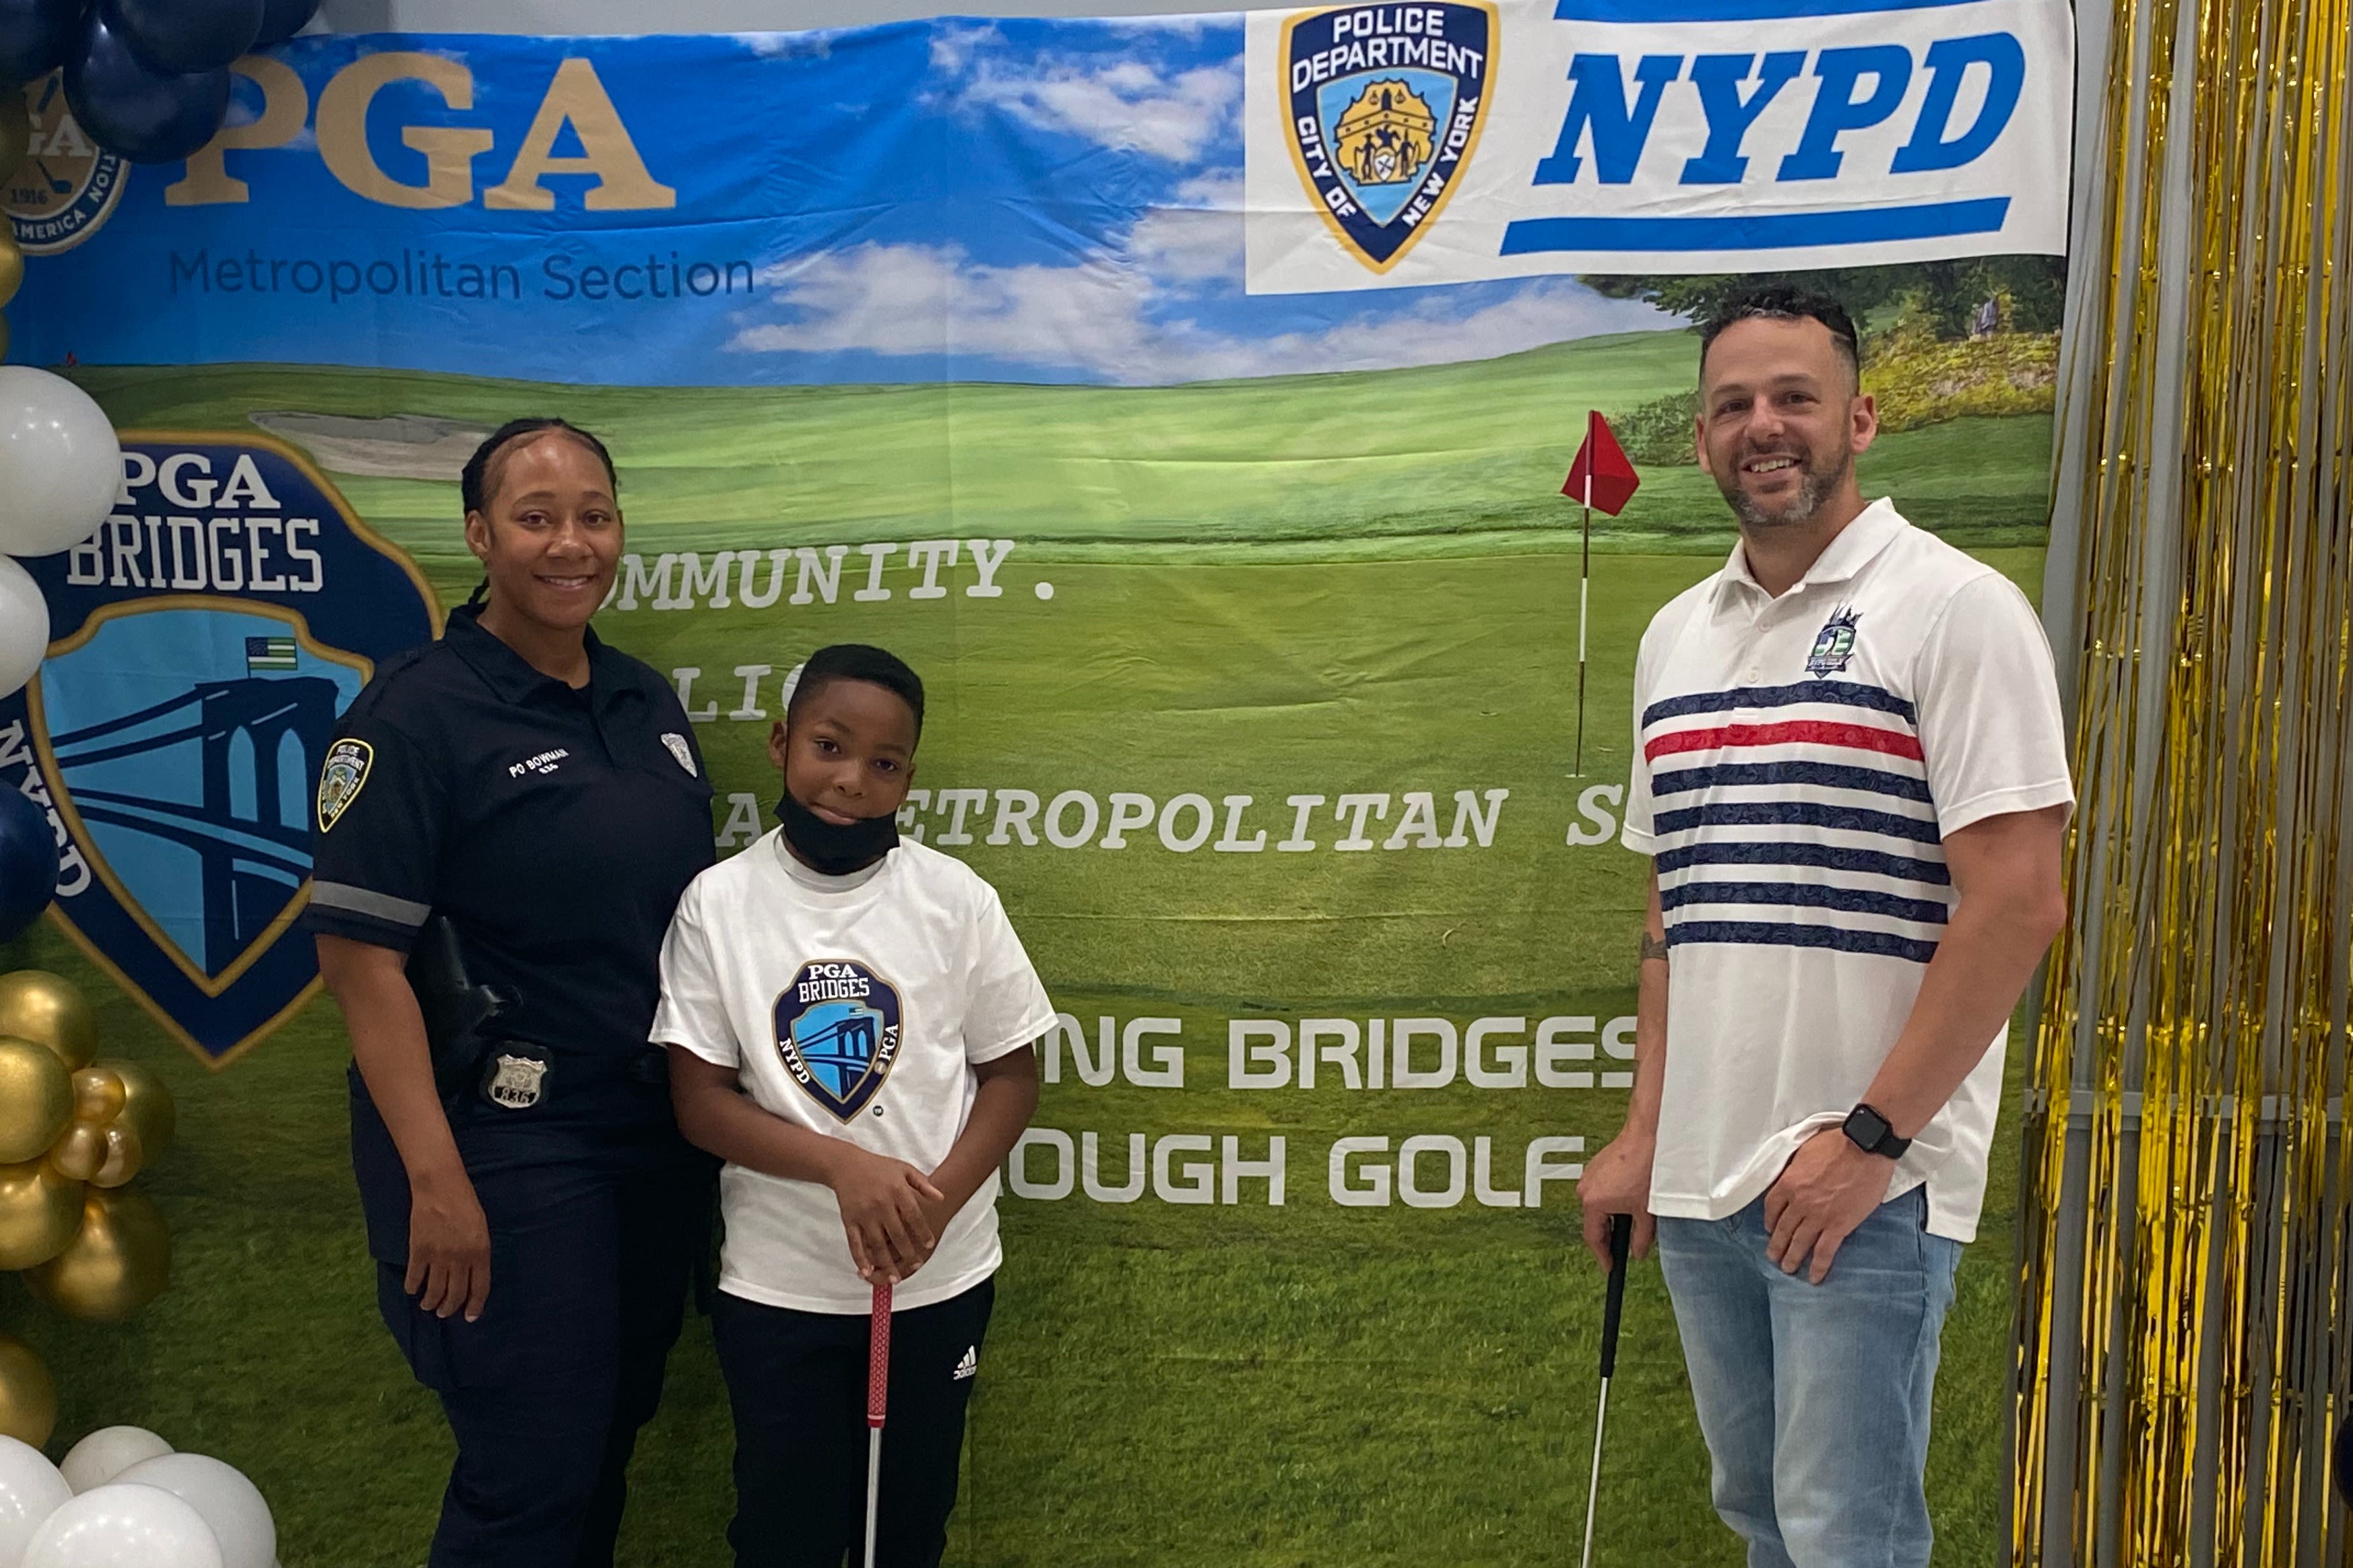 Rallo and a fellow NYPD officer at a PGA Bridges event.